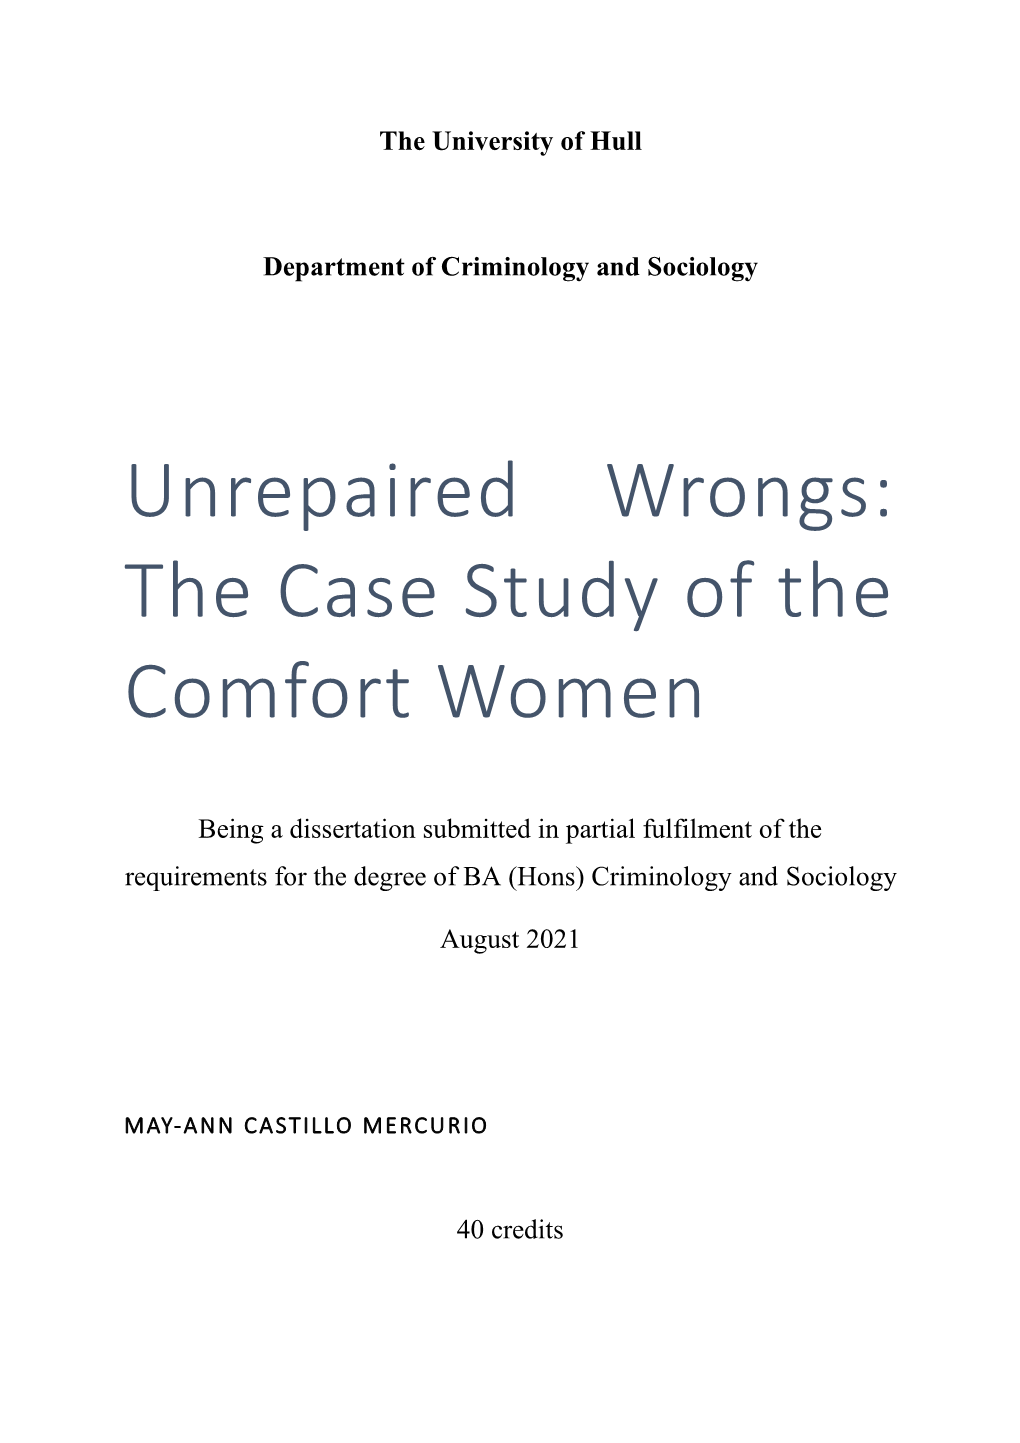 The Case Study of the Comfort Women